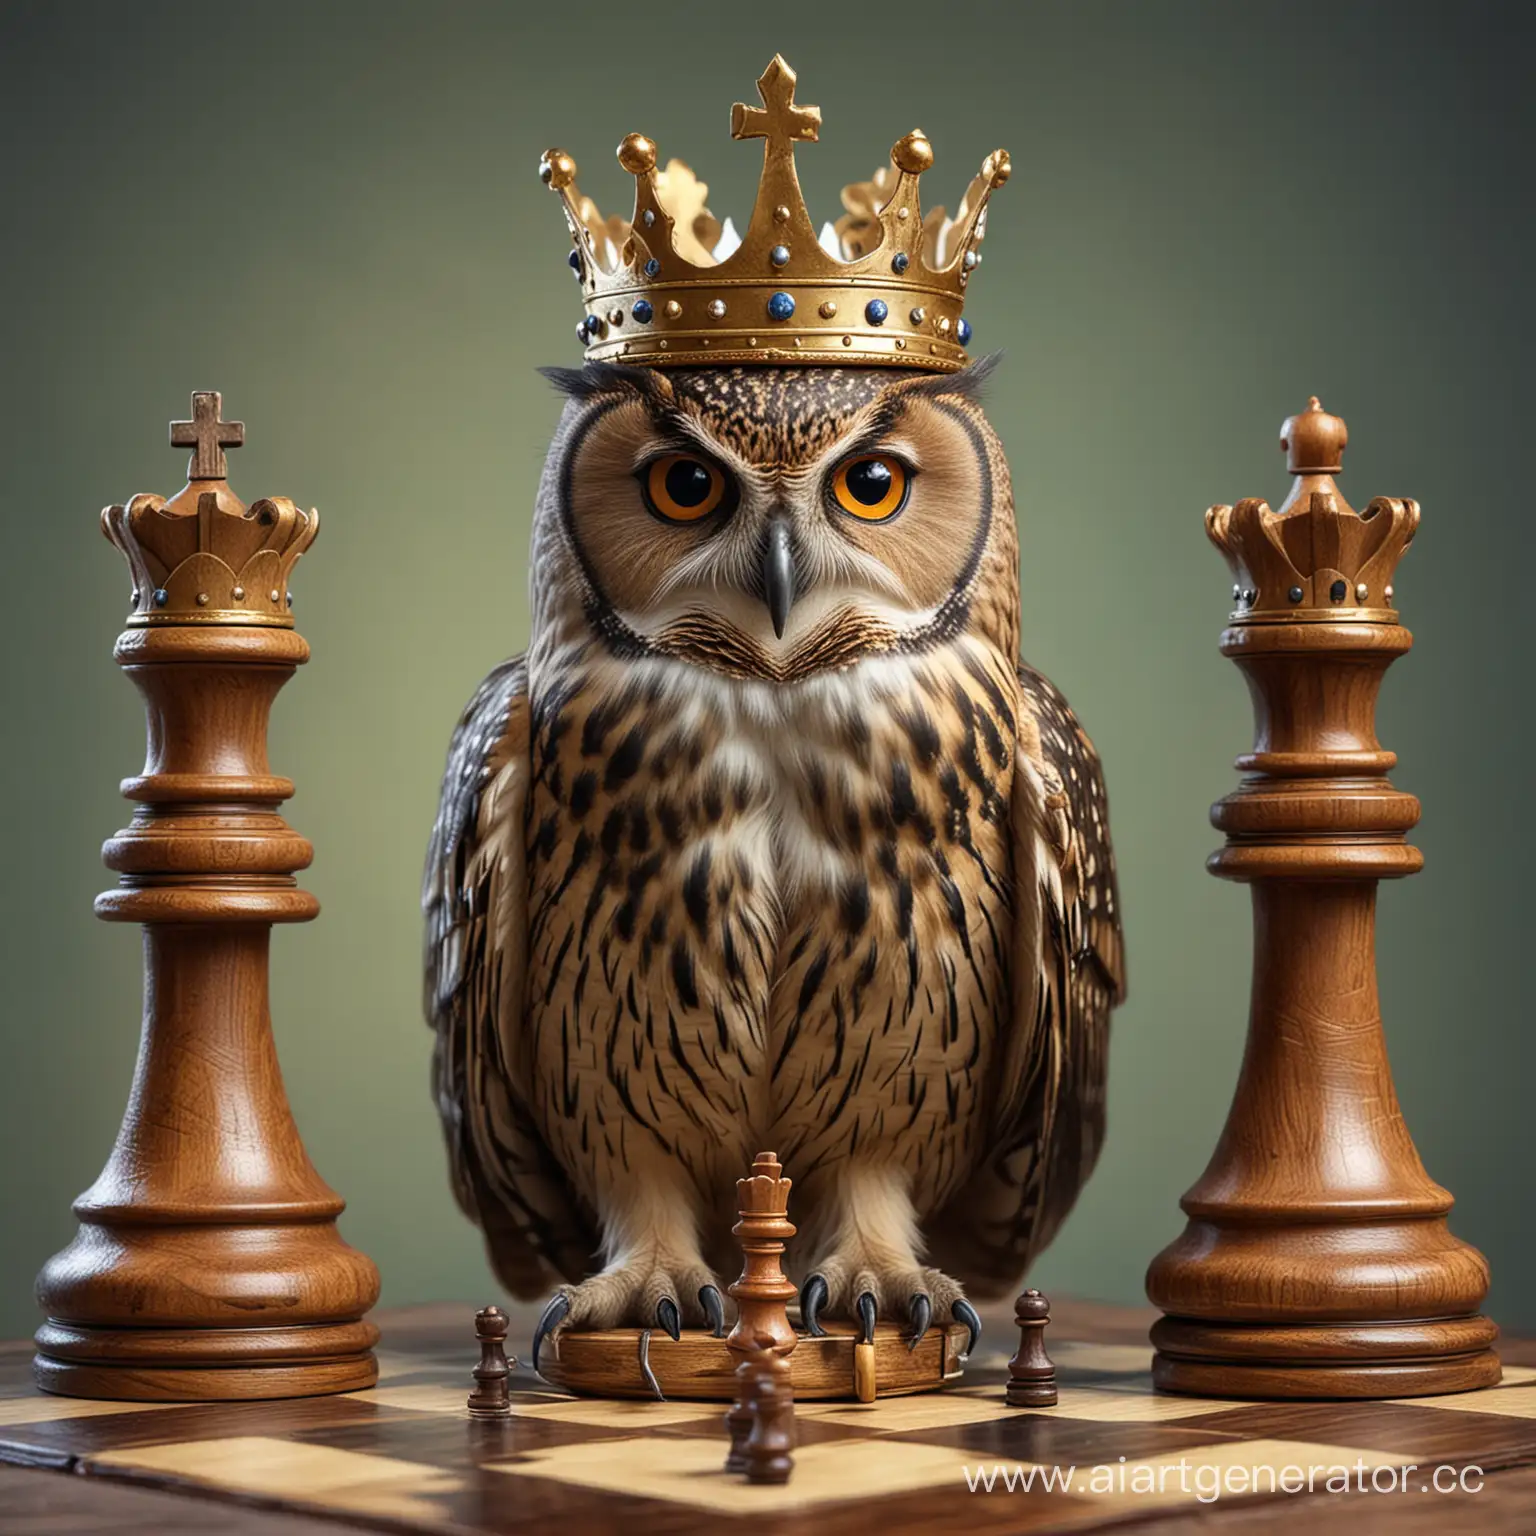 Wise-Owl-in-Crown-and-Glasses-Strategically-Playing-Chess